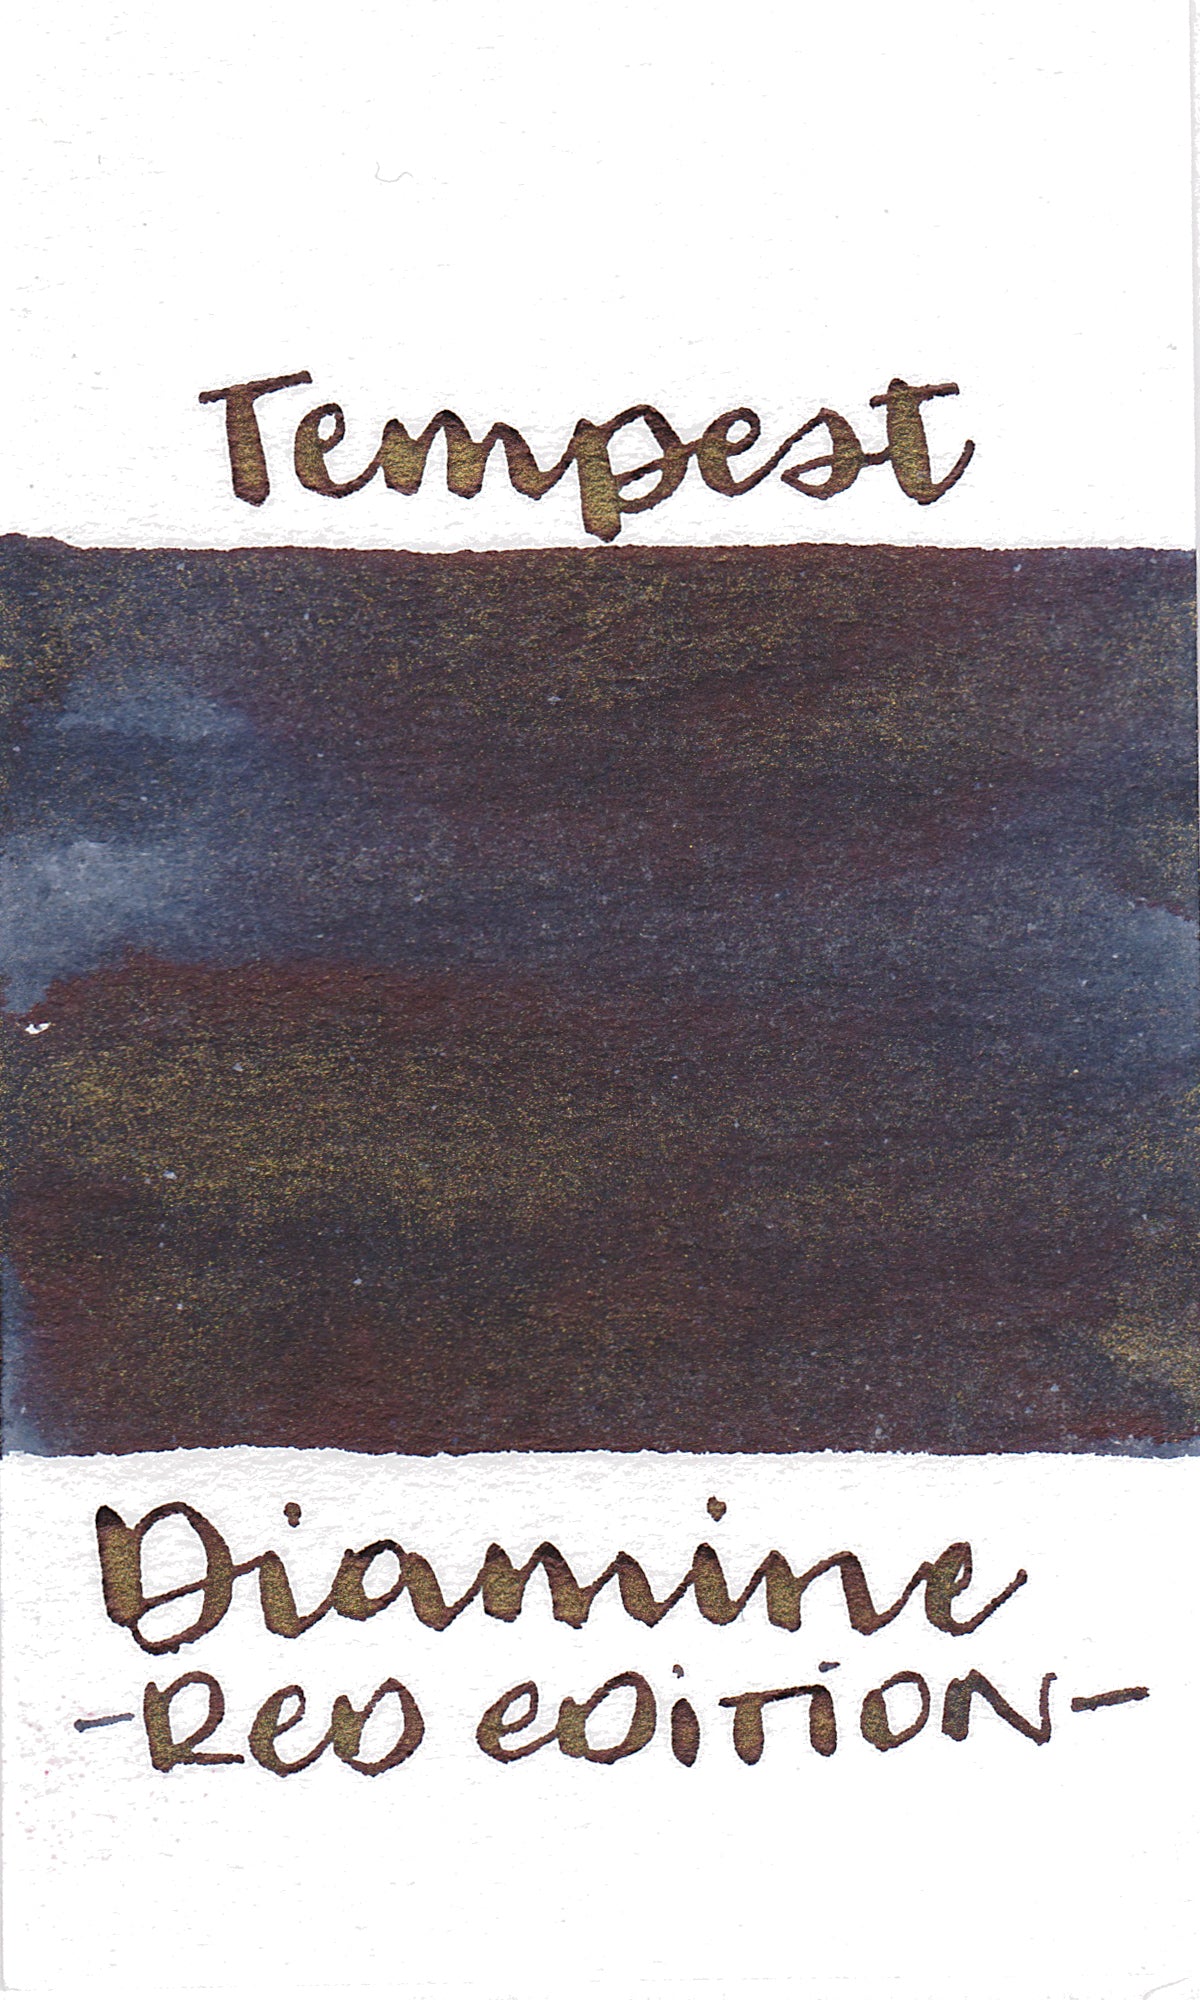 Diamine Red Edition Tempest Shimmer